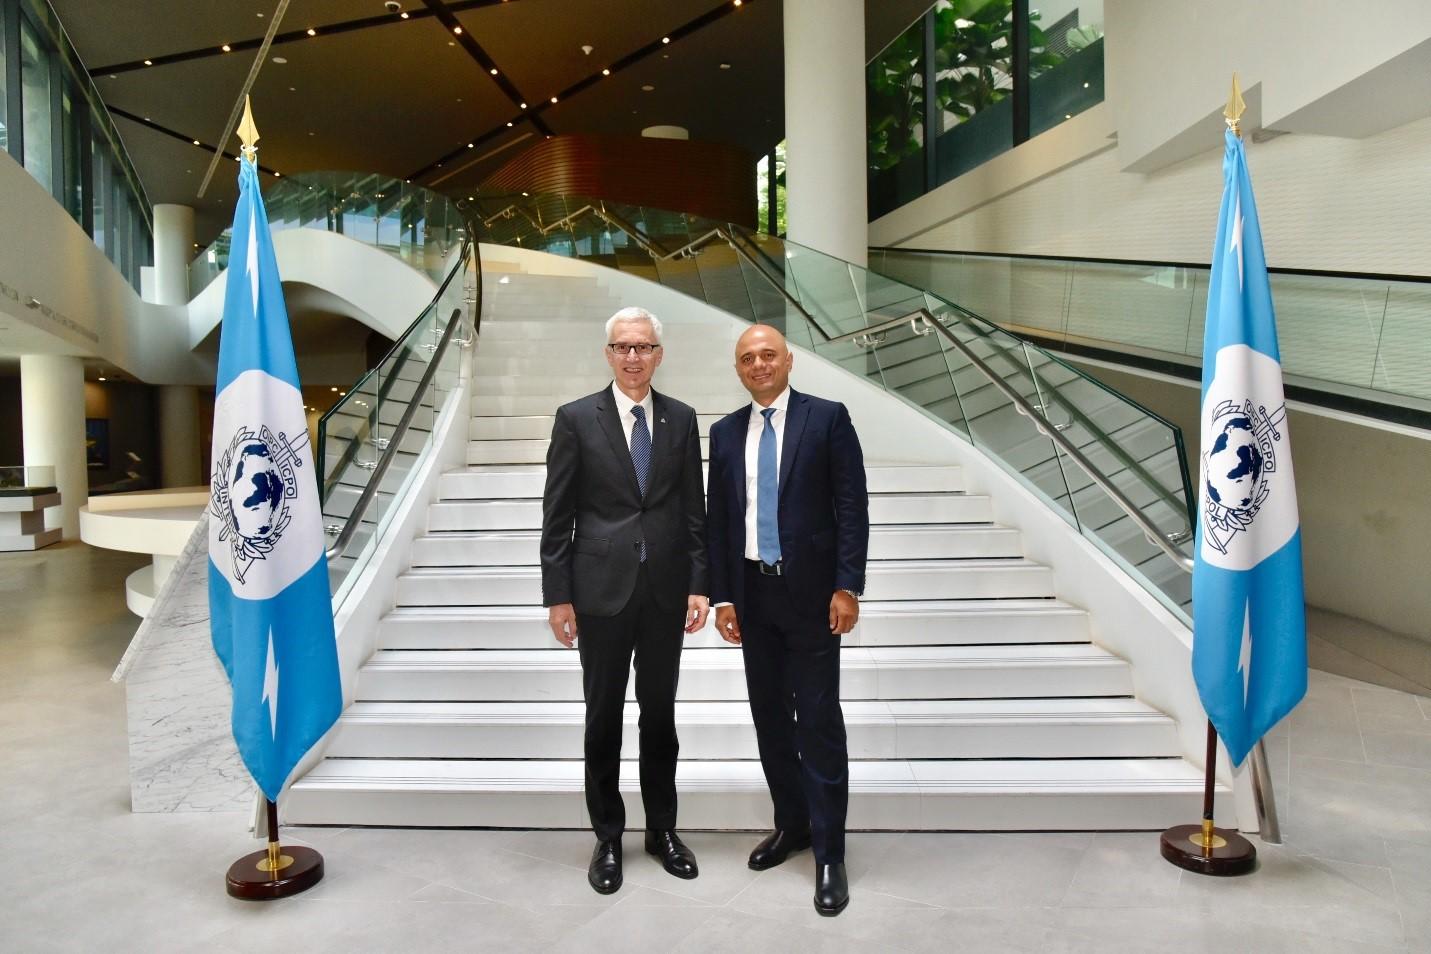 UK Home Secretary Sajid Javid visited the INTERPOL Global Complex for Innovation in Singapore to enhance collaboration against crime.